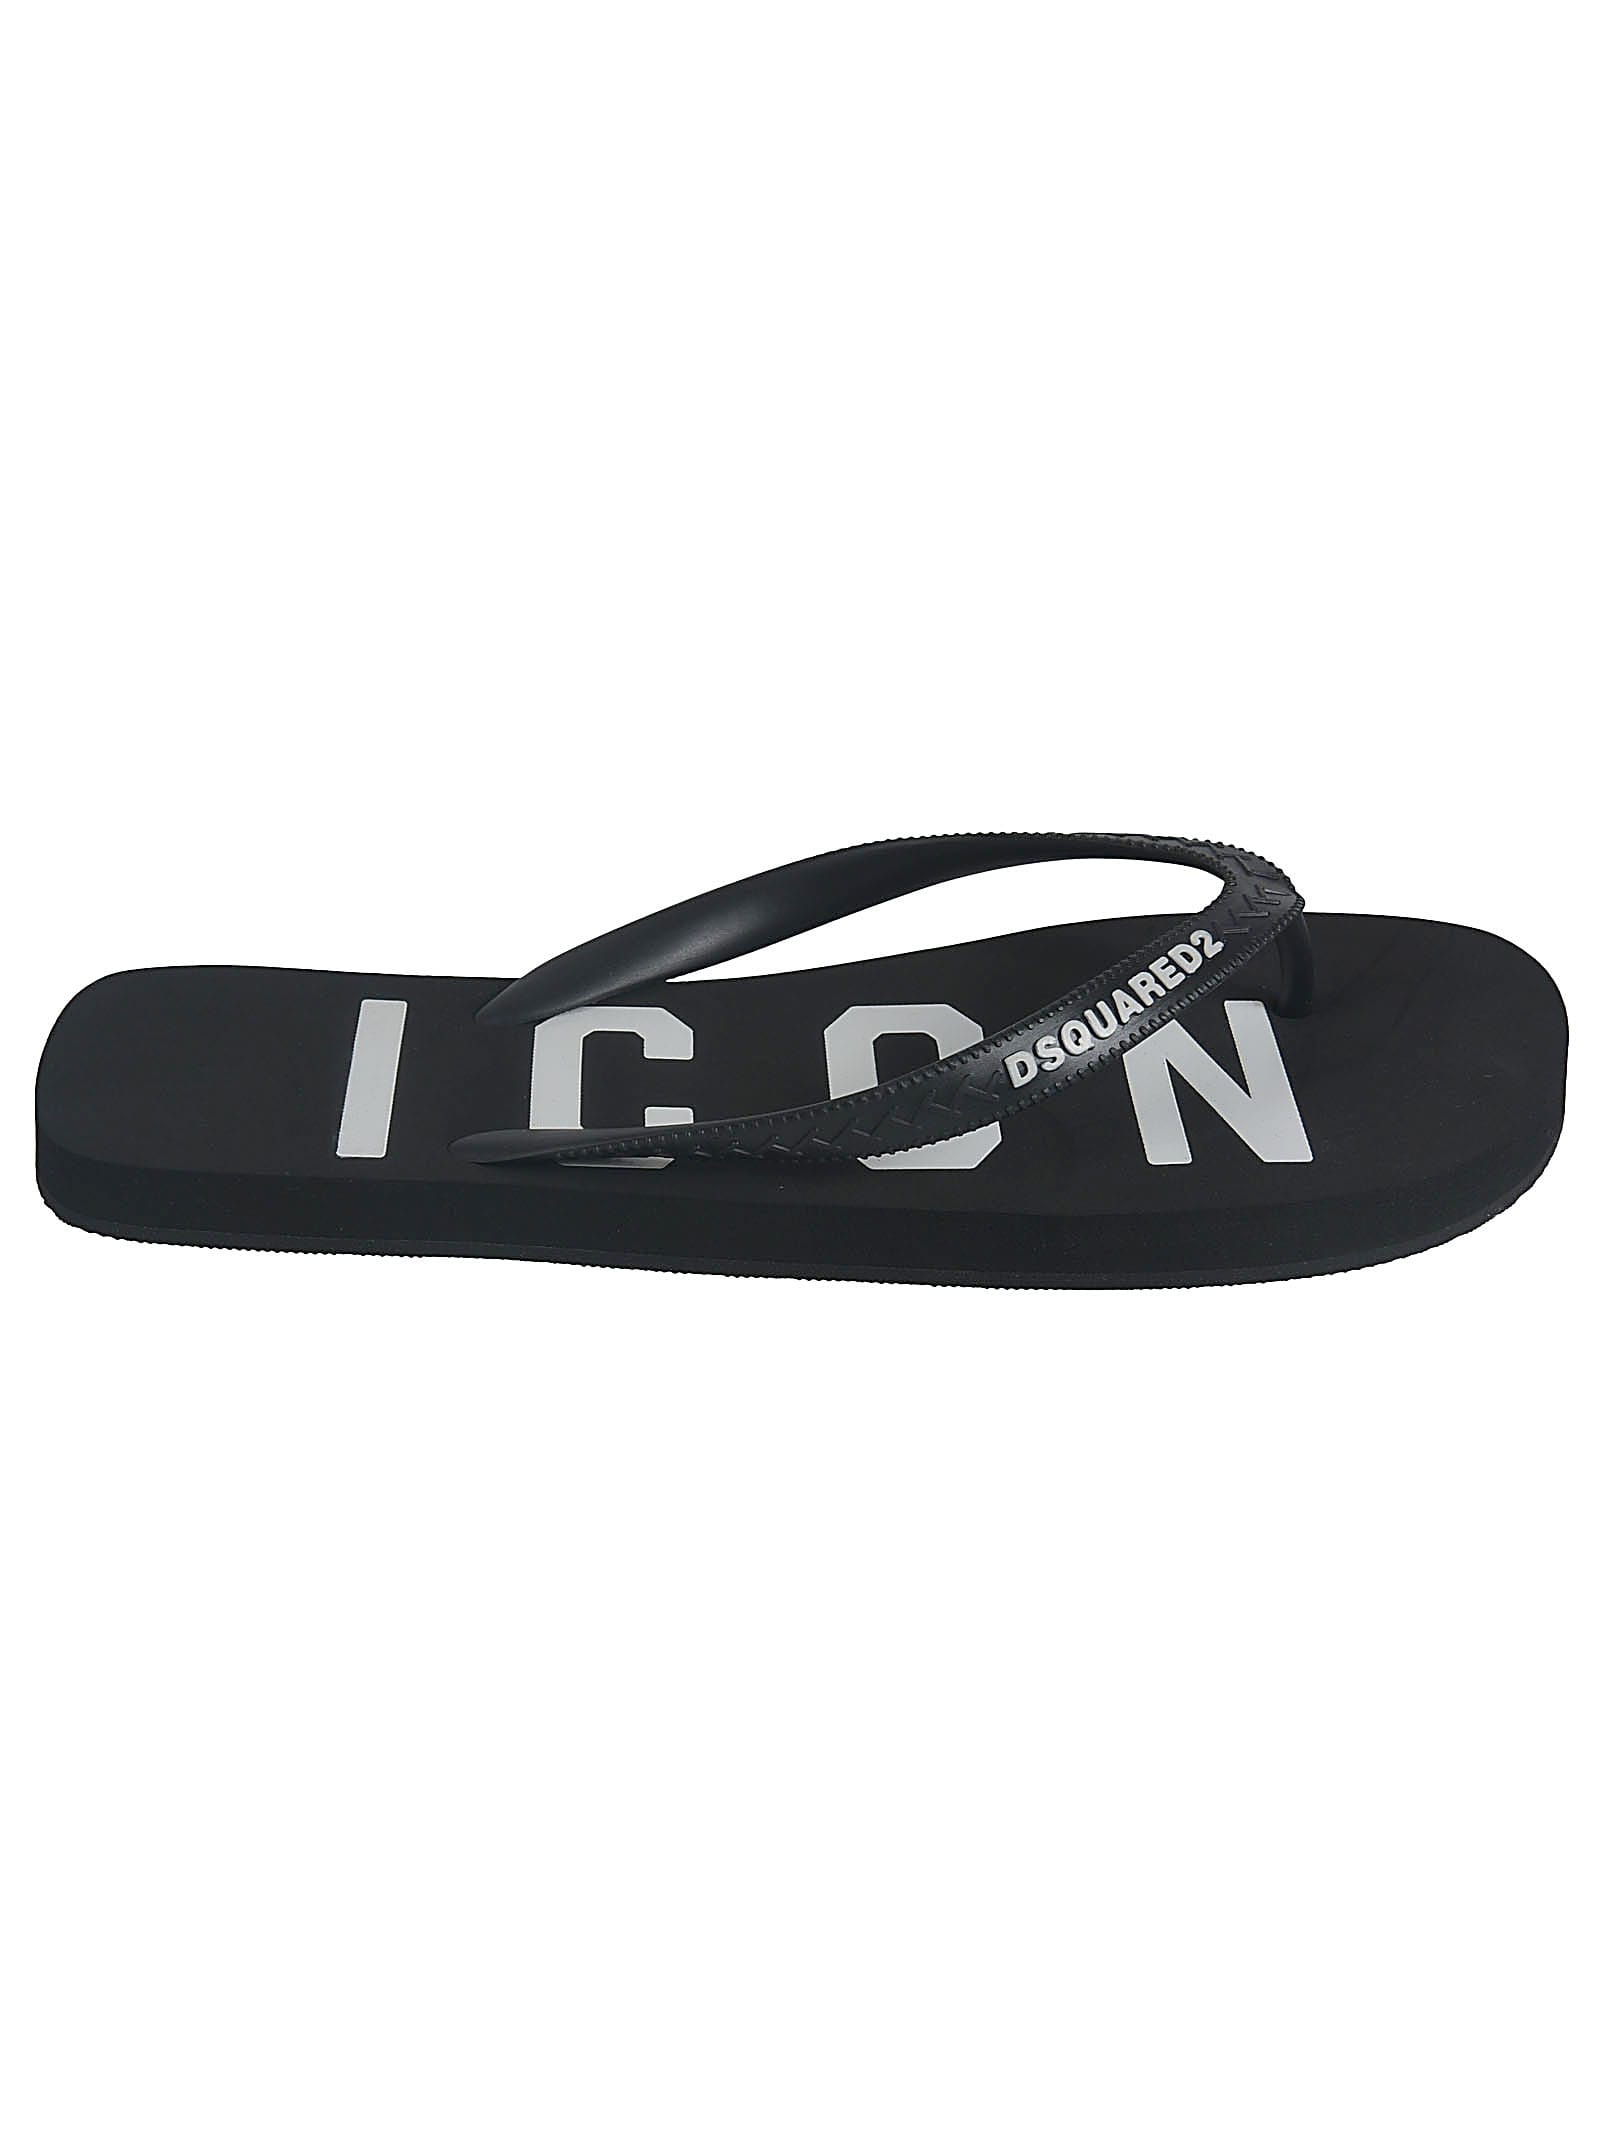 Dsquared2 ICON Printed Flip Flops